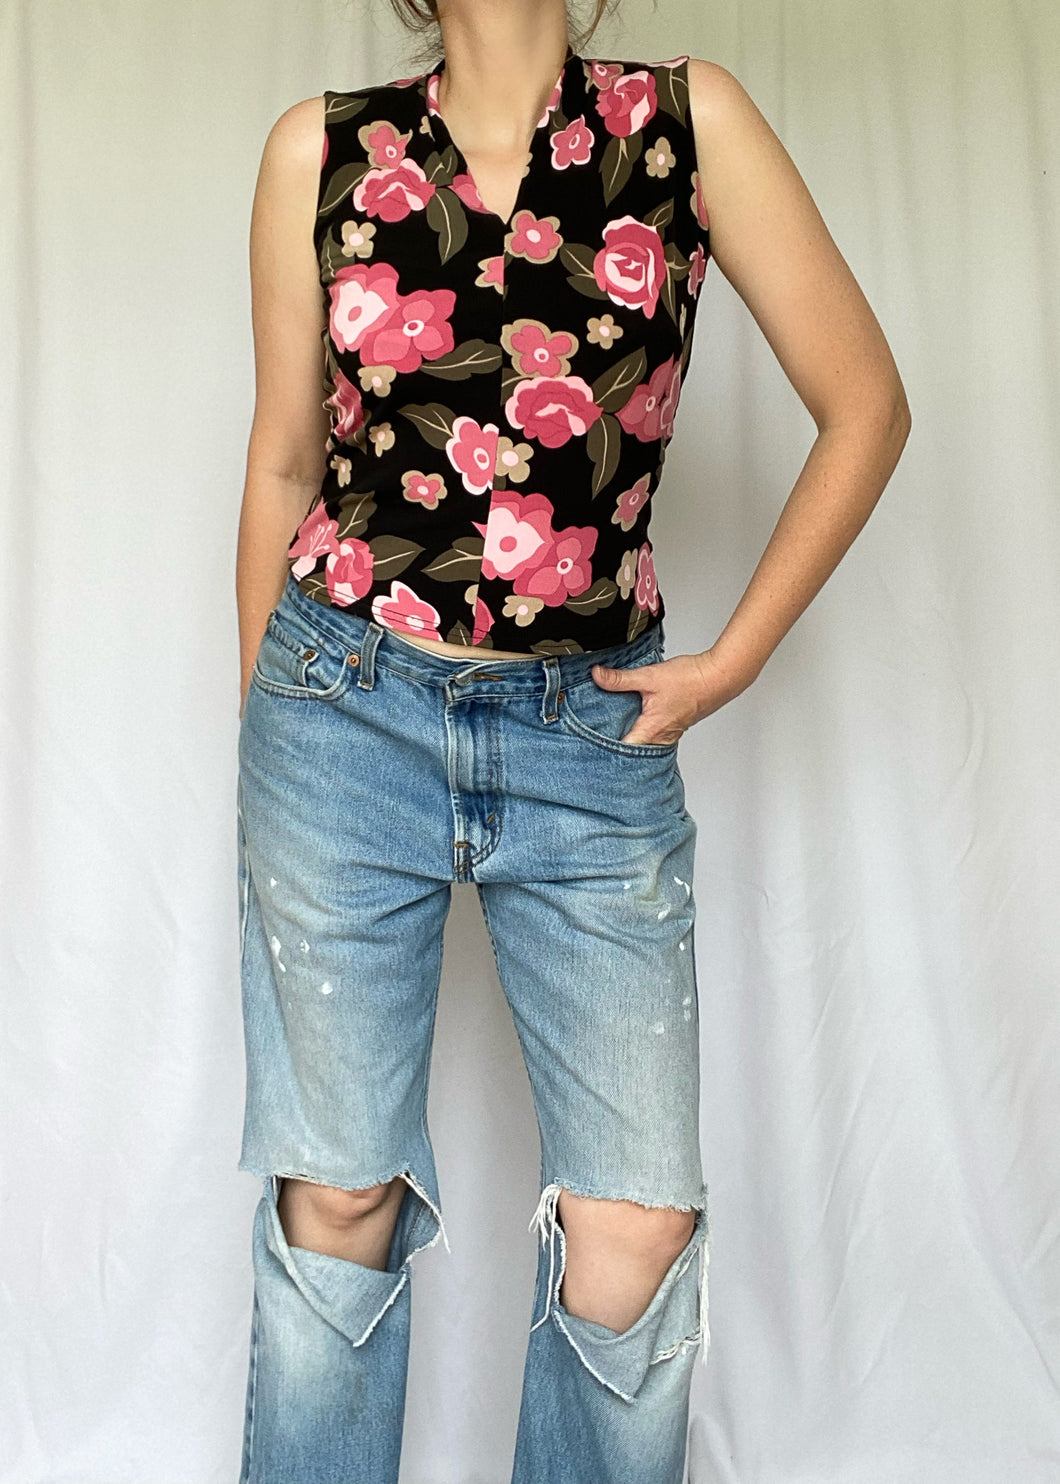 90's Floral Sleeveless Top